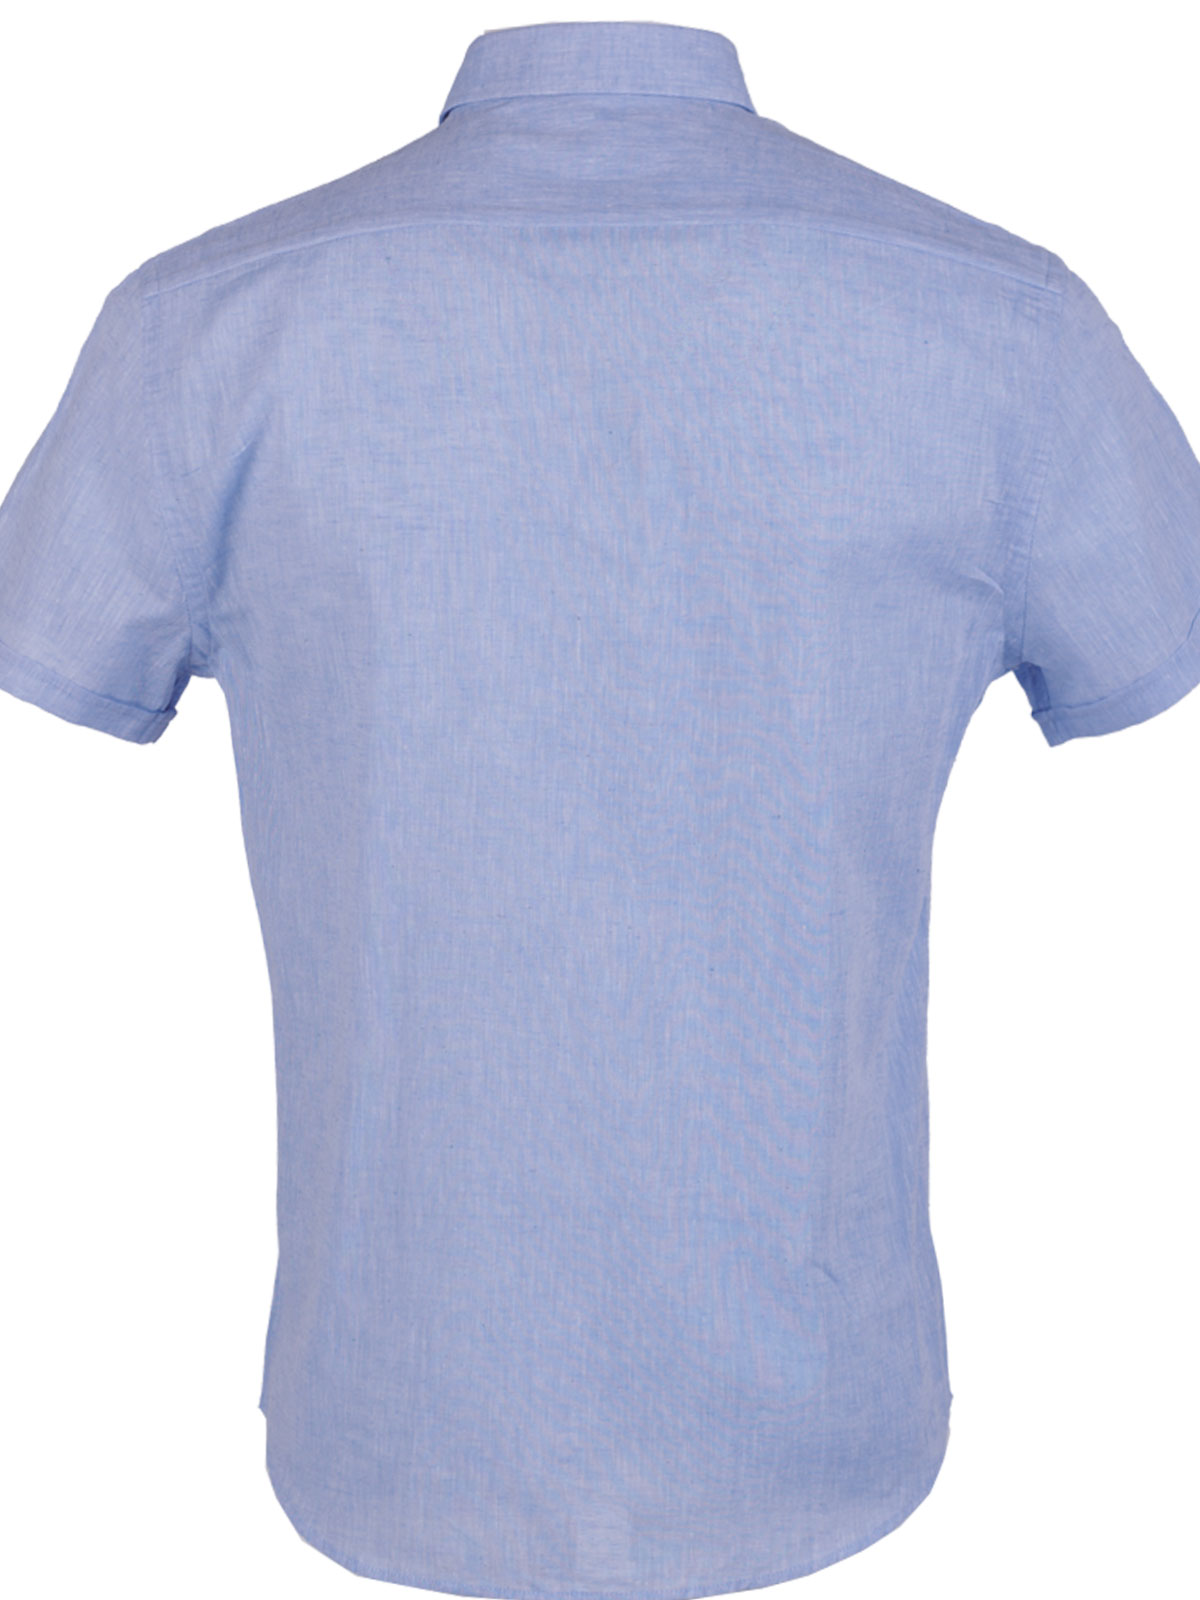 Linen and cotton shirt in blue - 80228 € 43.87 img2